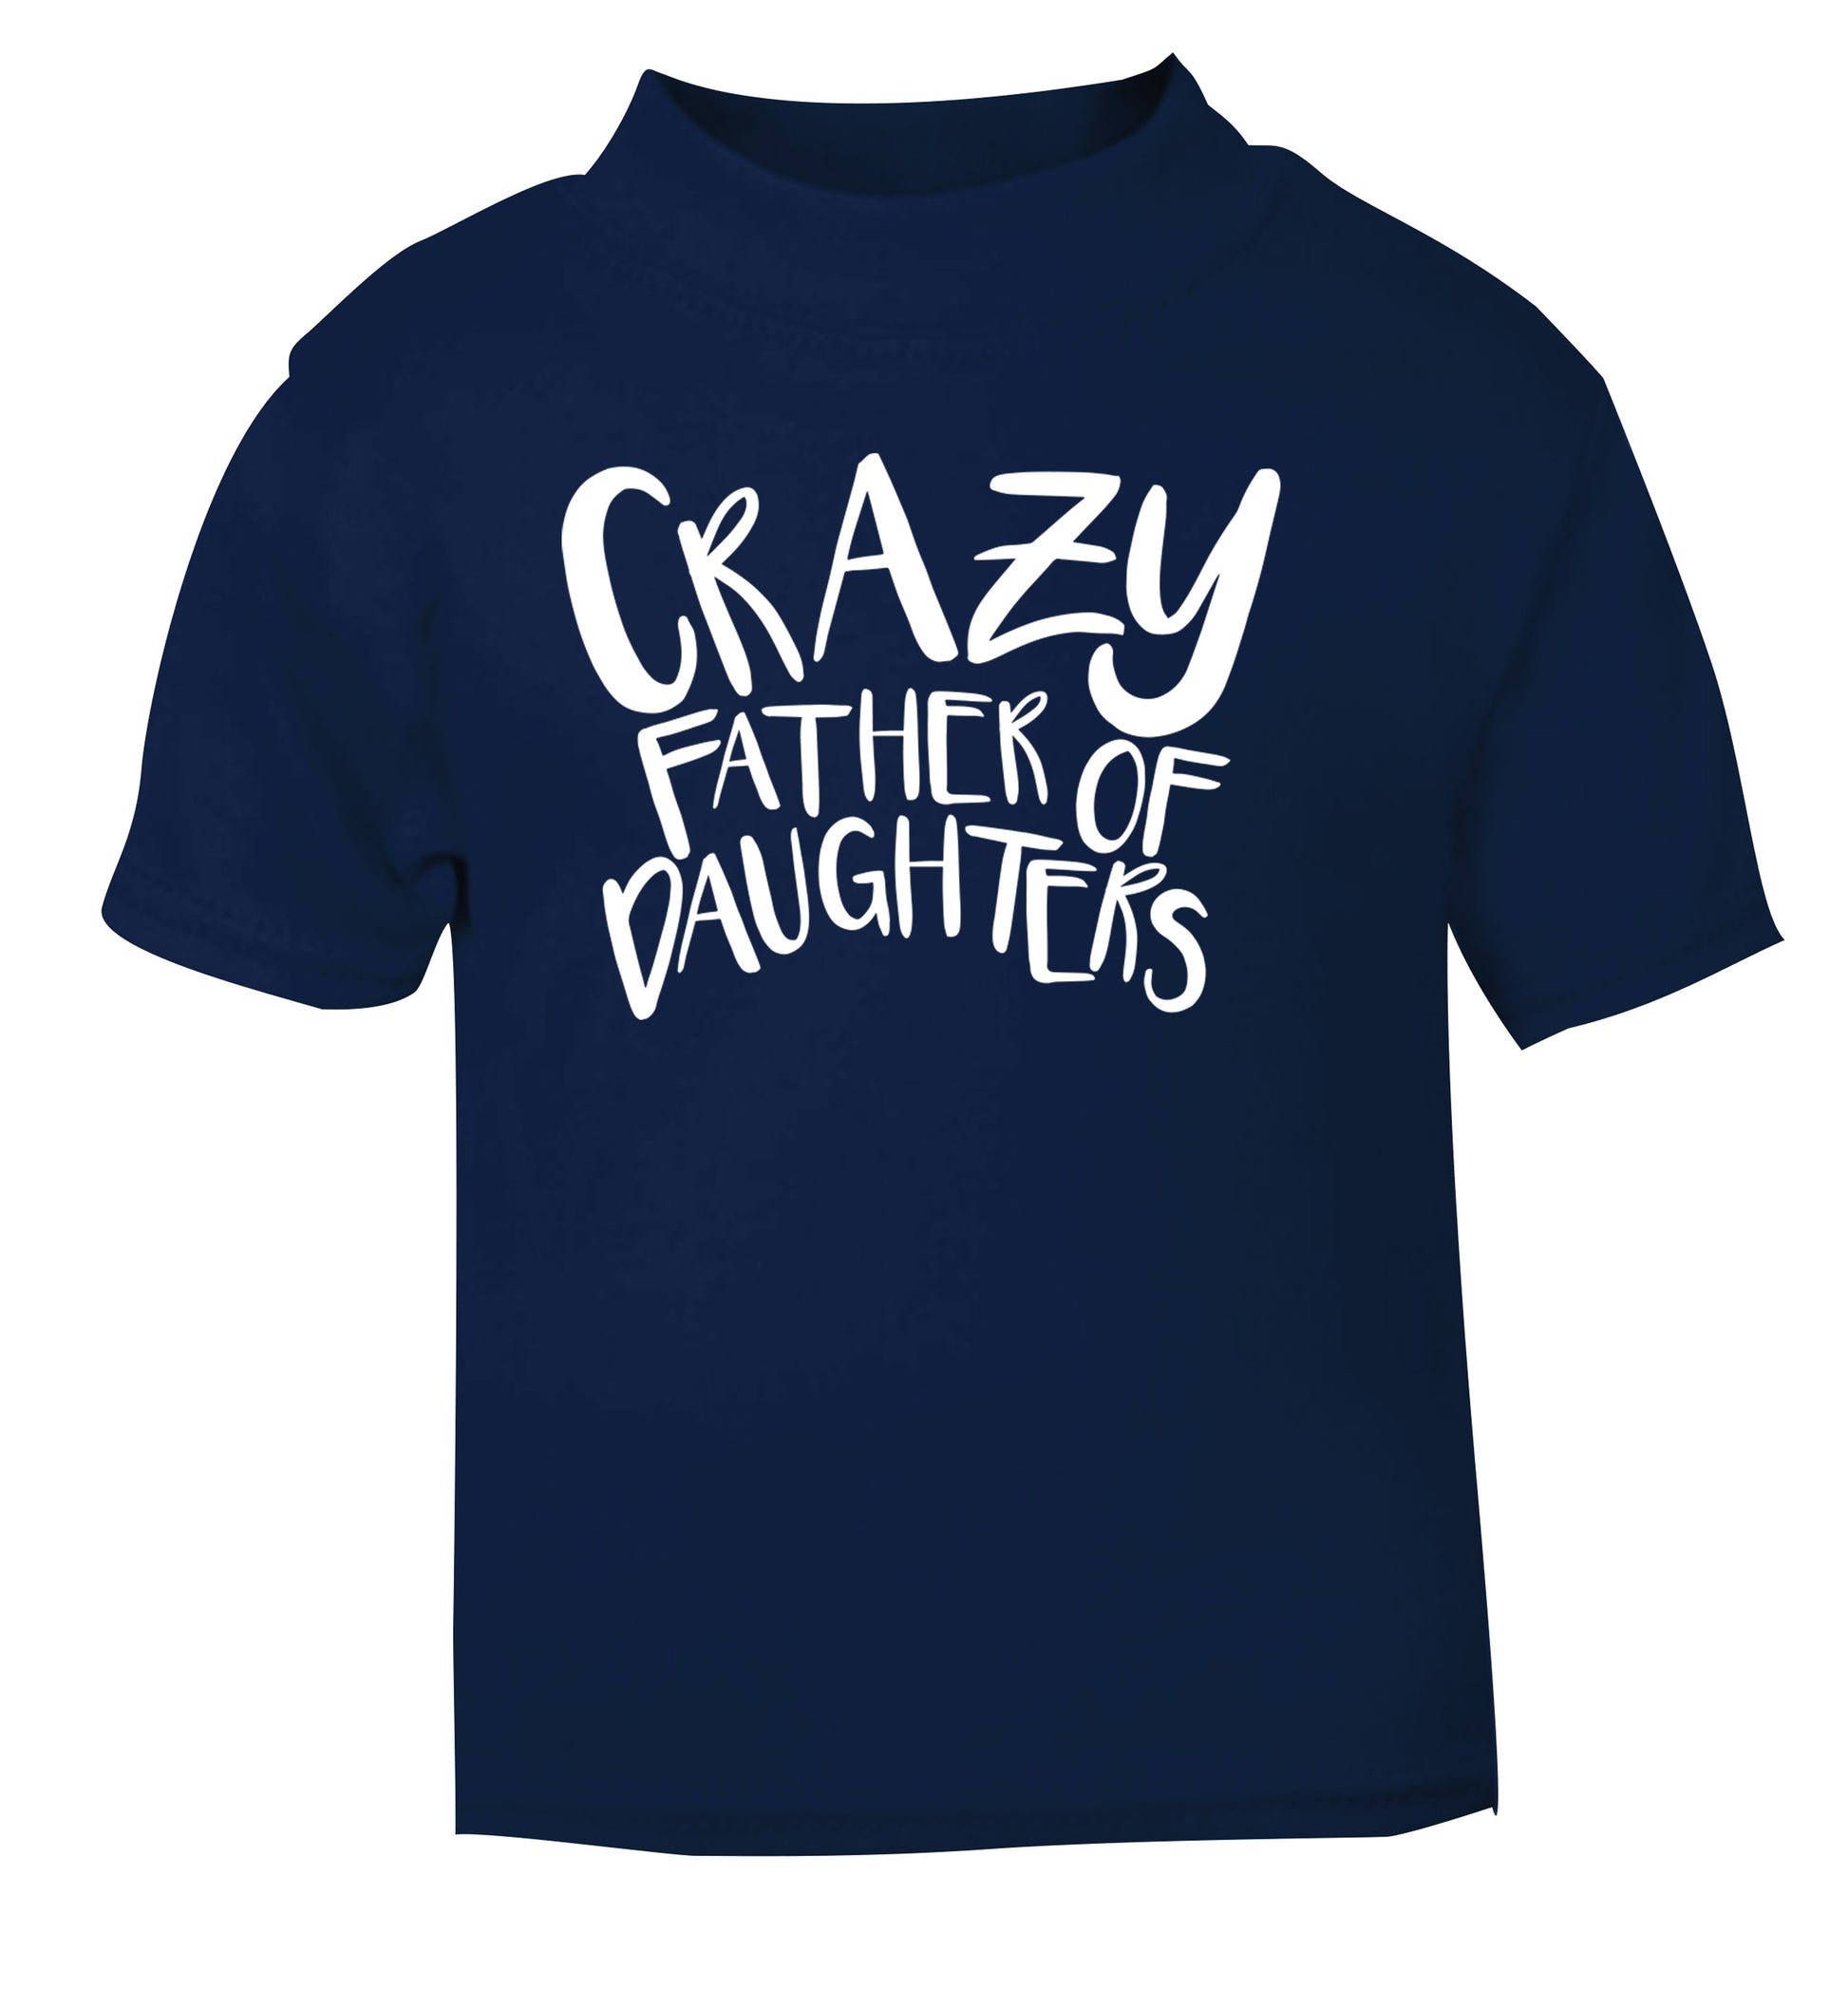 Crazy father of daughters navy Baby Toddler Tshirt 2 Years